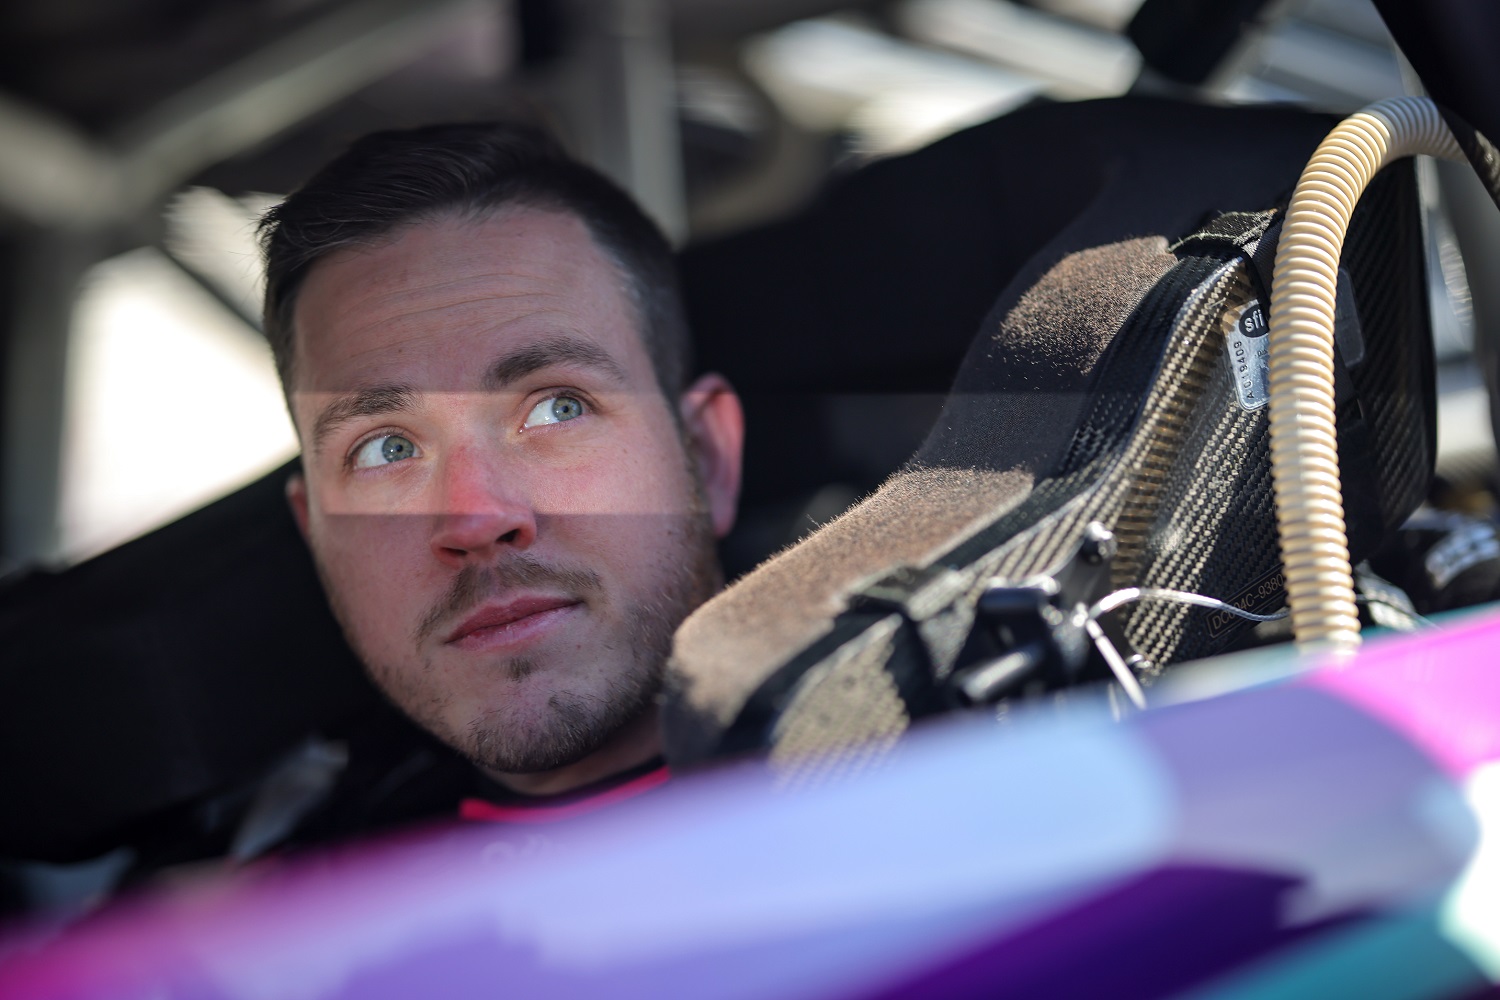 Alex Bowman sits in his car during qualifying for the NASCAR Cup Series Ambetter Health 400 at Atlanta Motor Speedway on March 18, 2023. | Jonathan Bachman/Getty Images